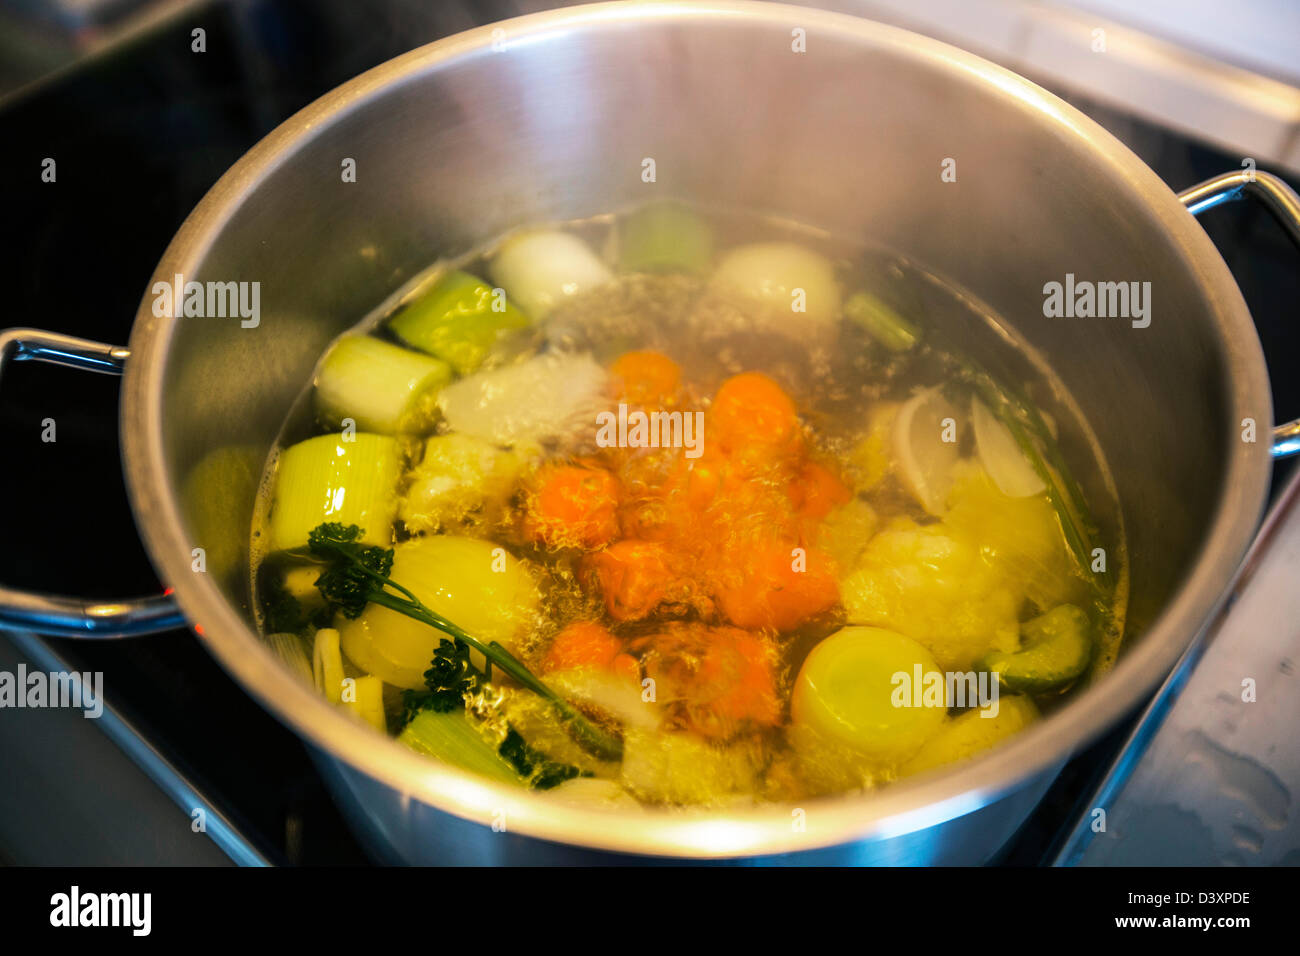 Different vegetables cooking in a pot for a vegetable soup. Stock Photo